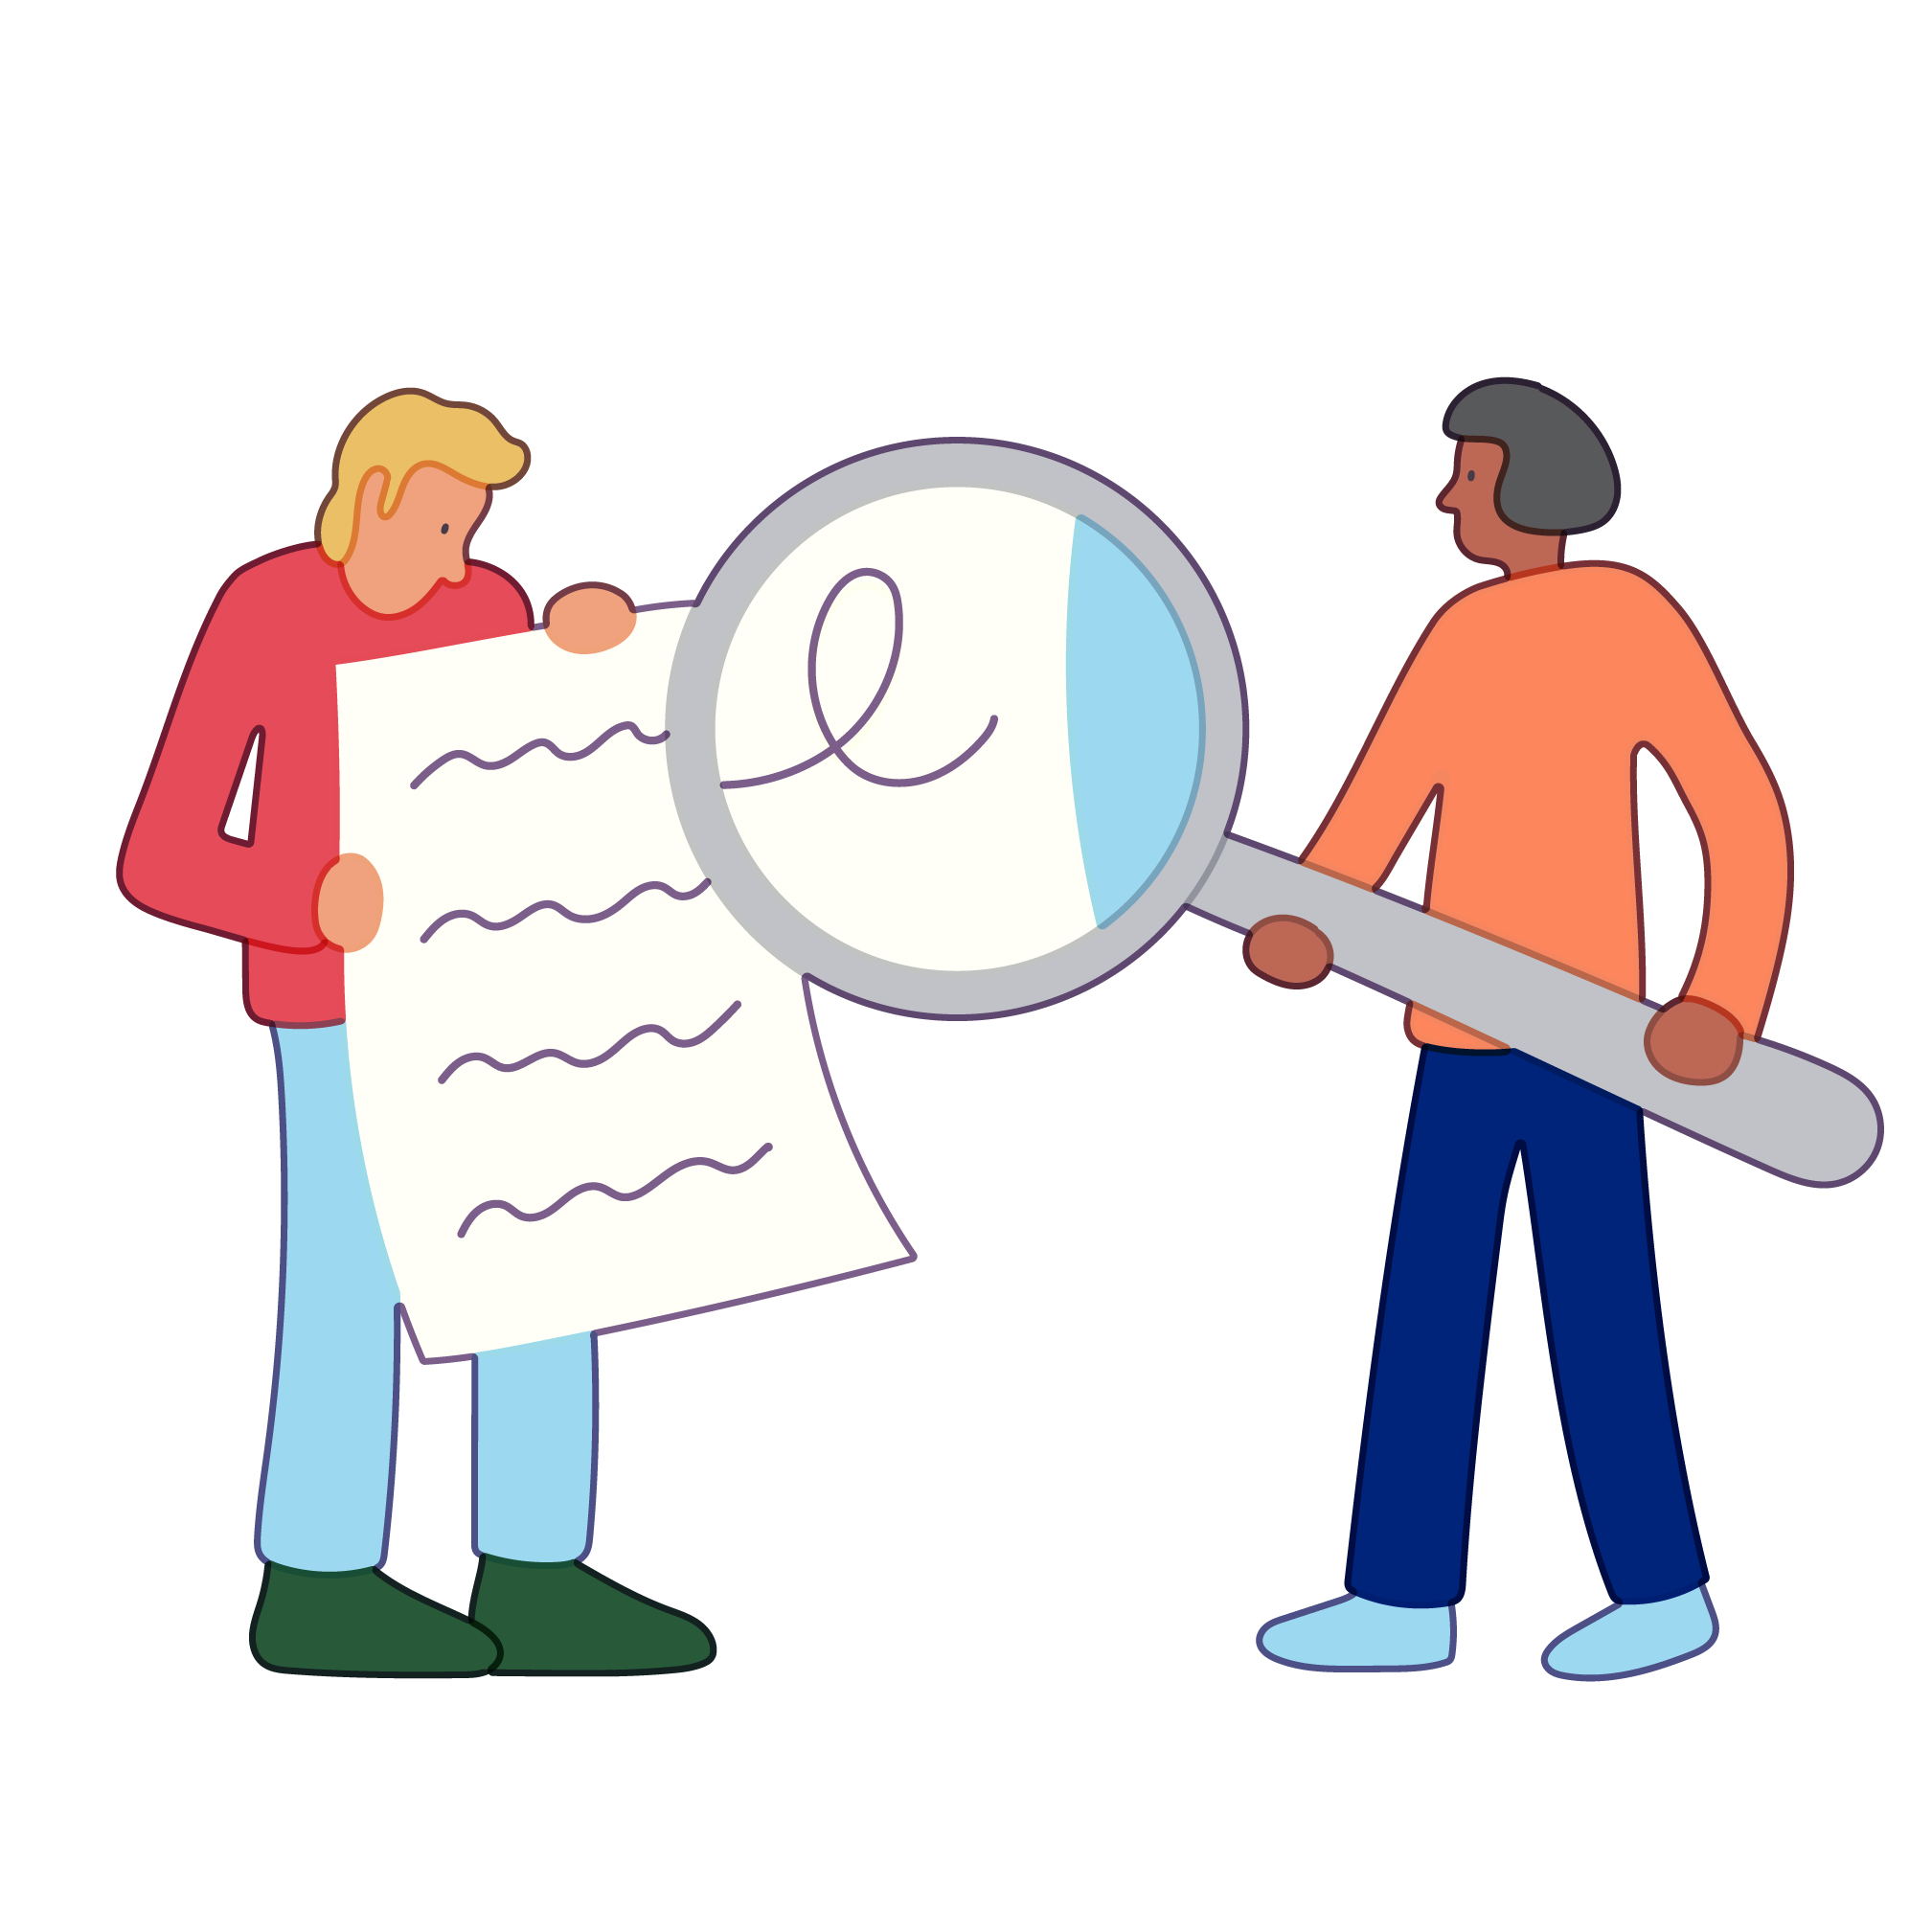 A friend holds a giant magnifying glass over a sheet of paper held by another friend.